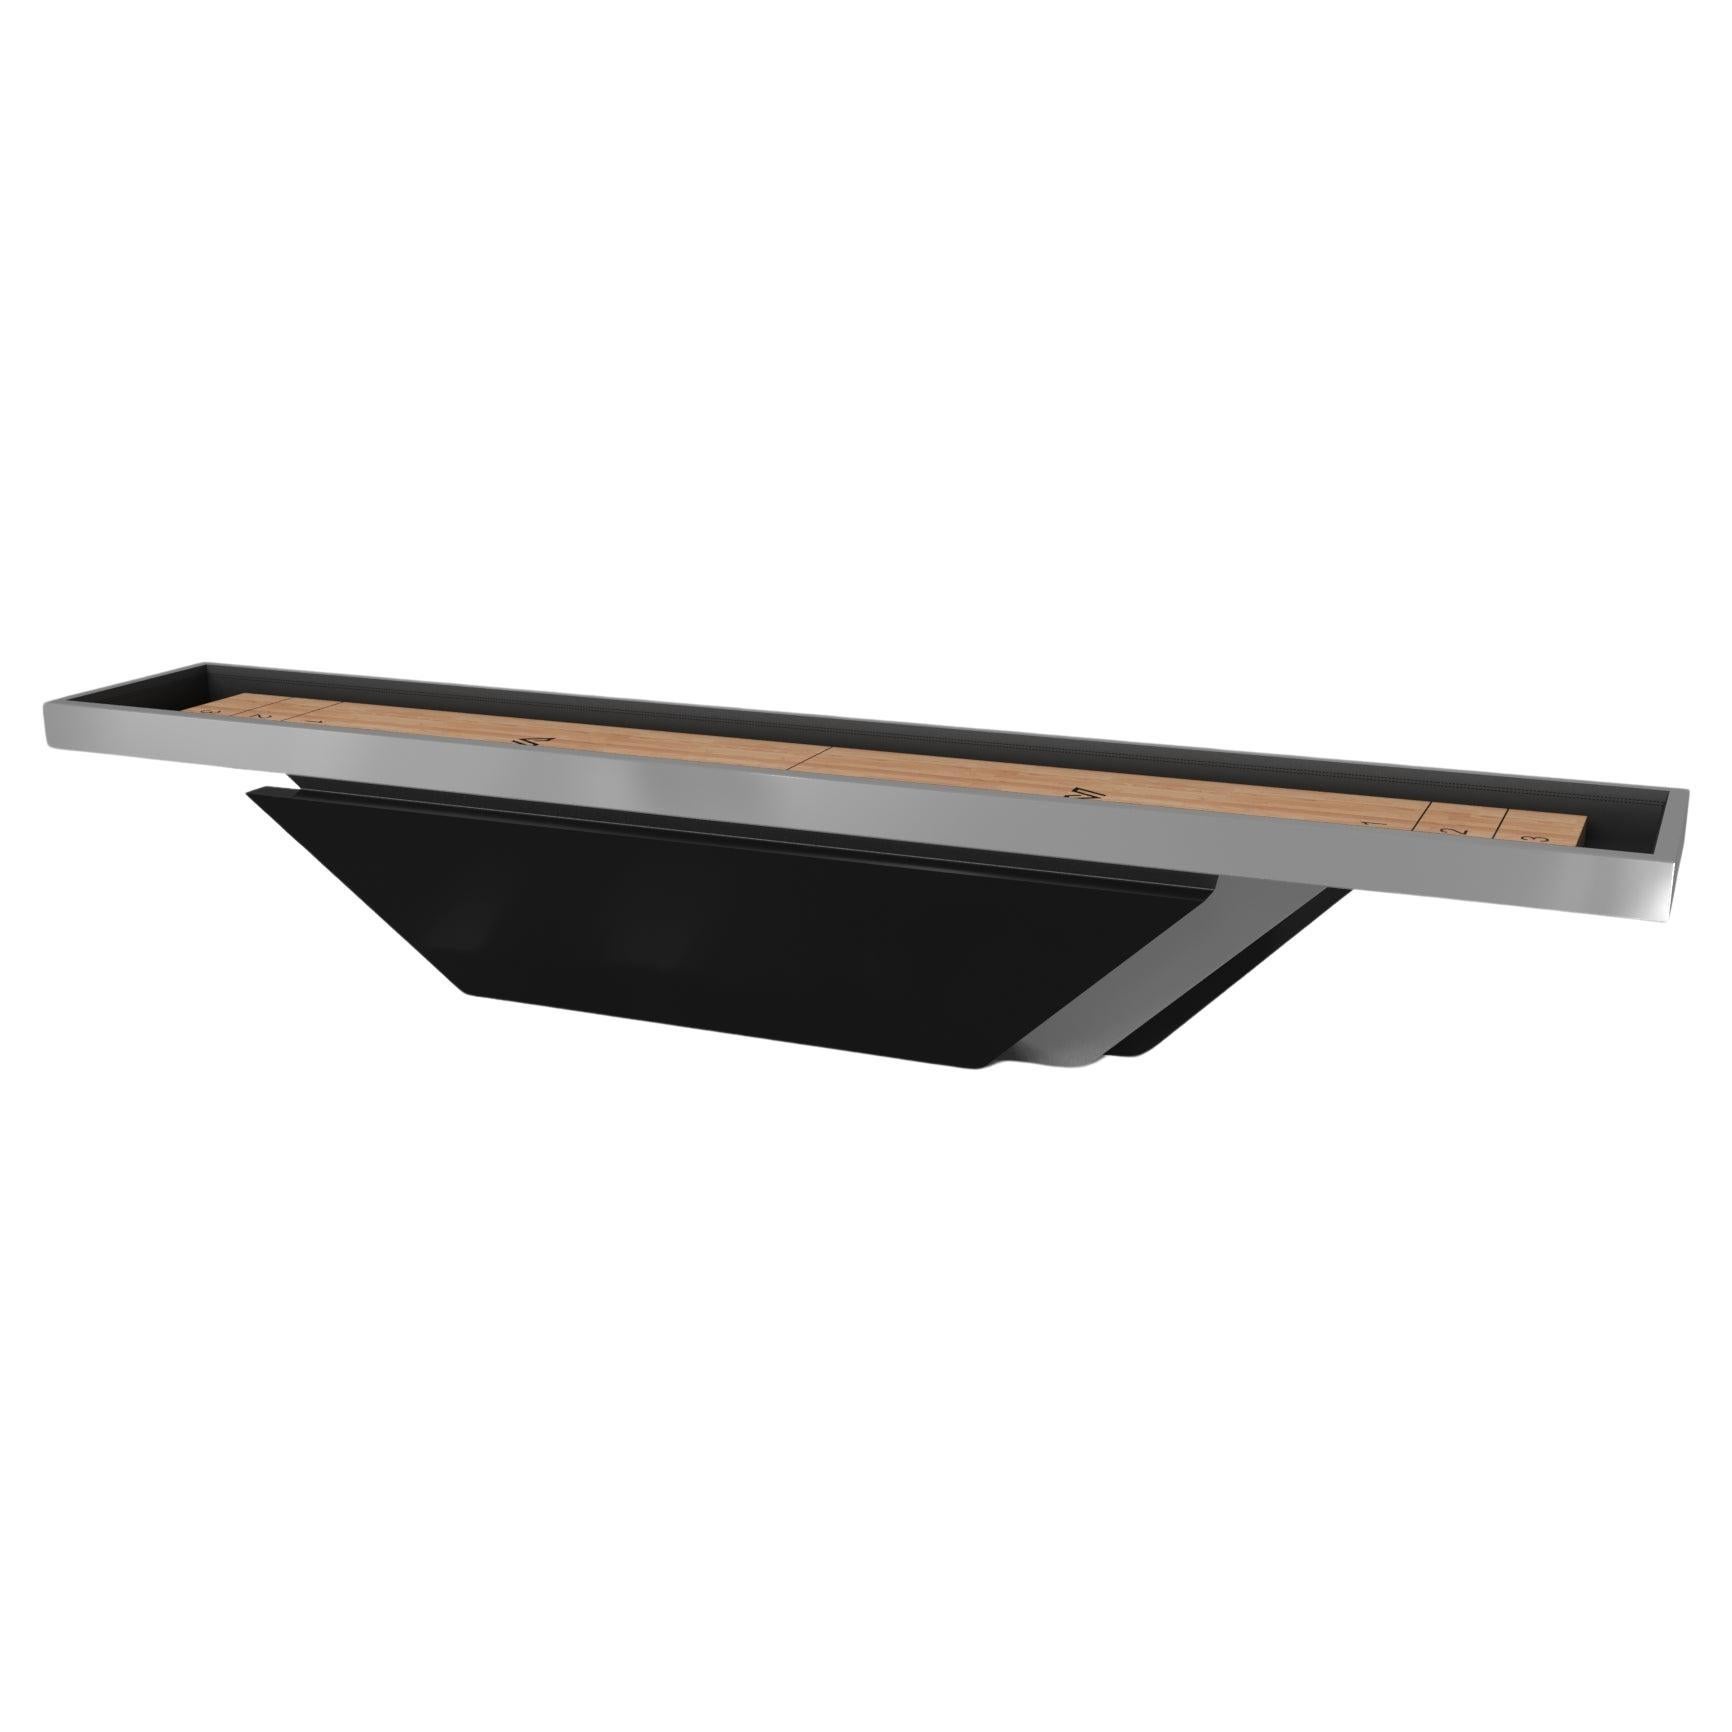 Elevate Customs Vogue Shuffleboard Tables/Stainless Steel Sheet Metal in 14'-USA